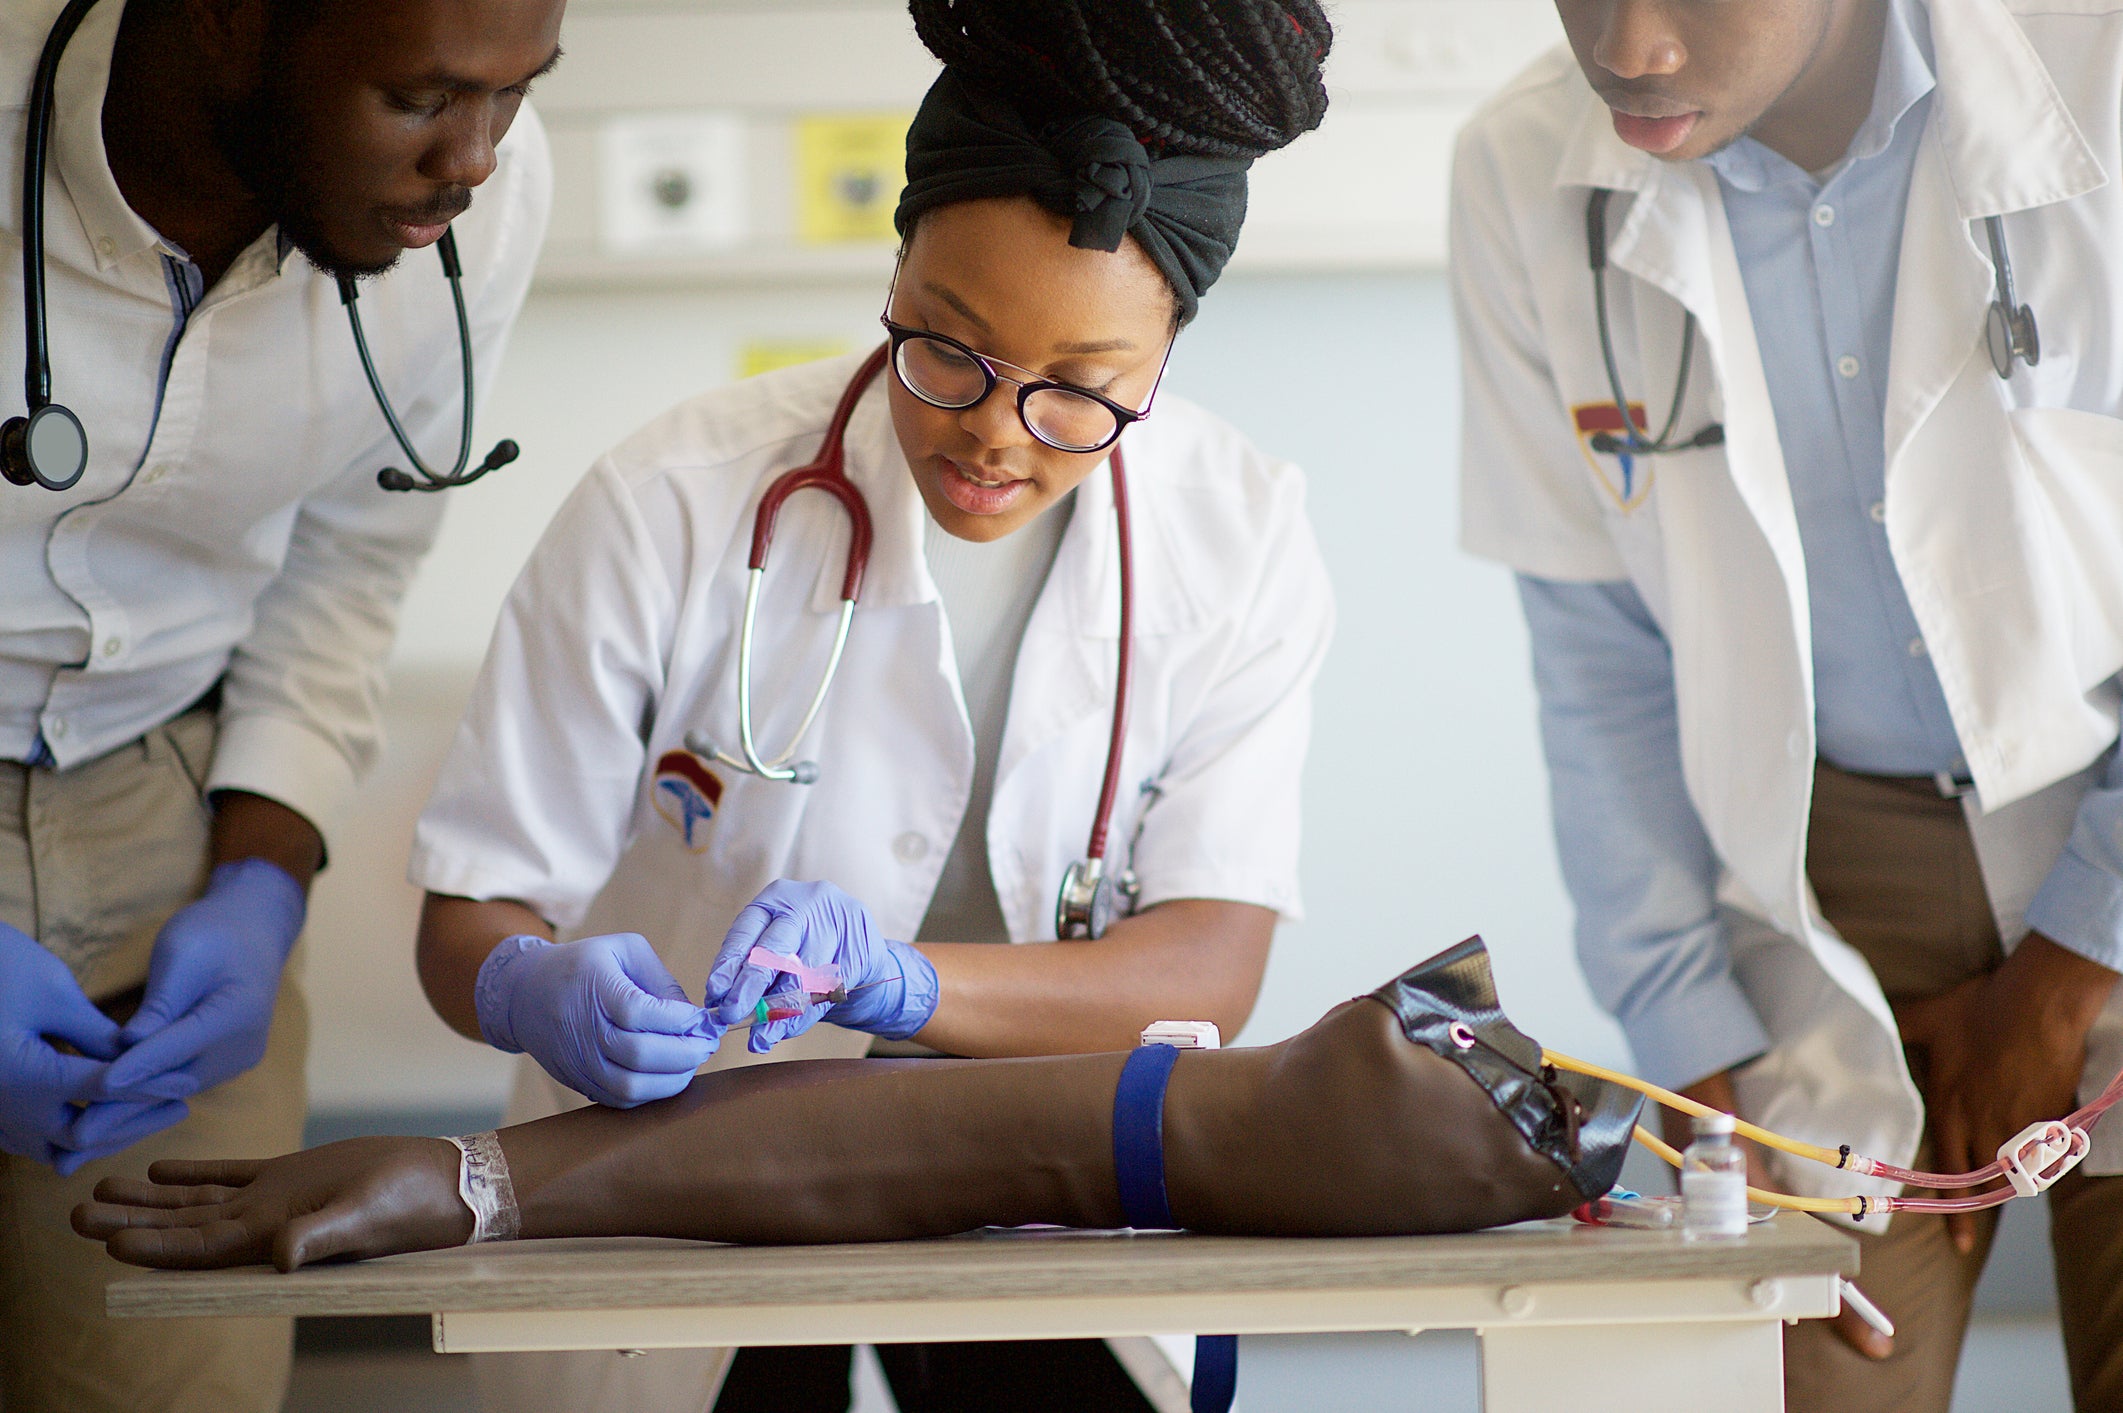 Universal Music Group Is Offering Scholarships To Black Students That Want To Become Doctors